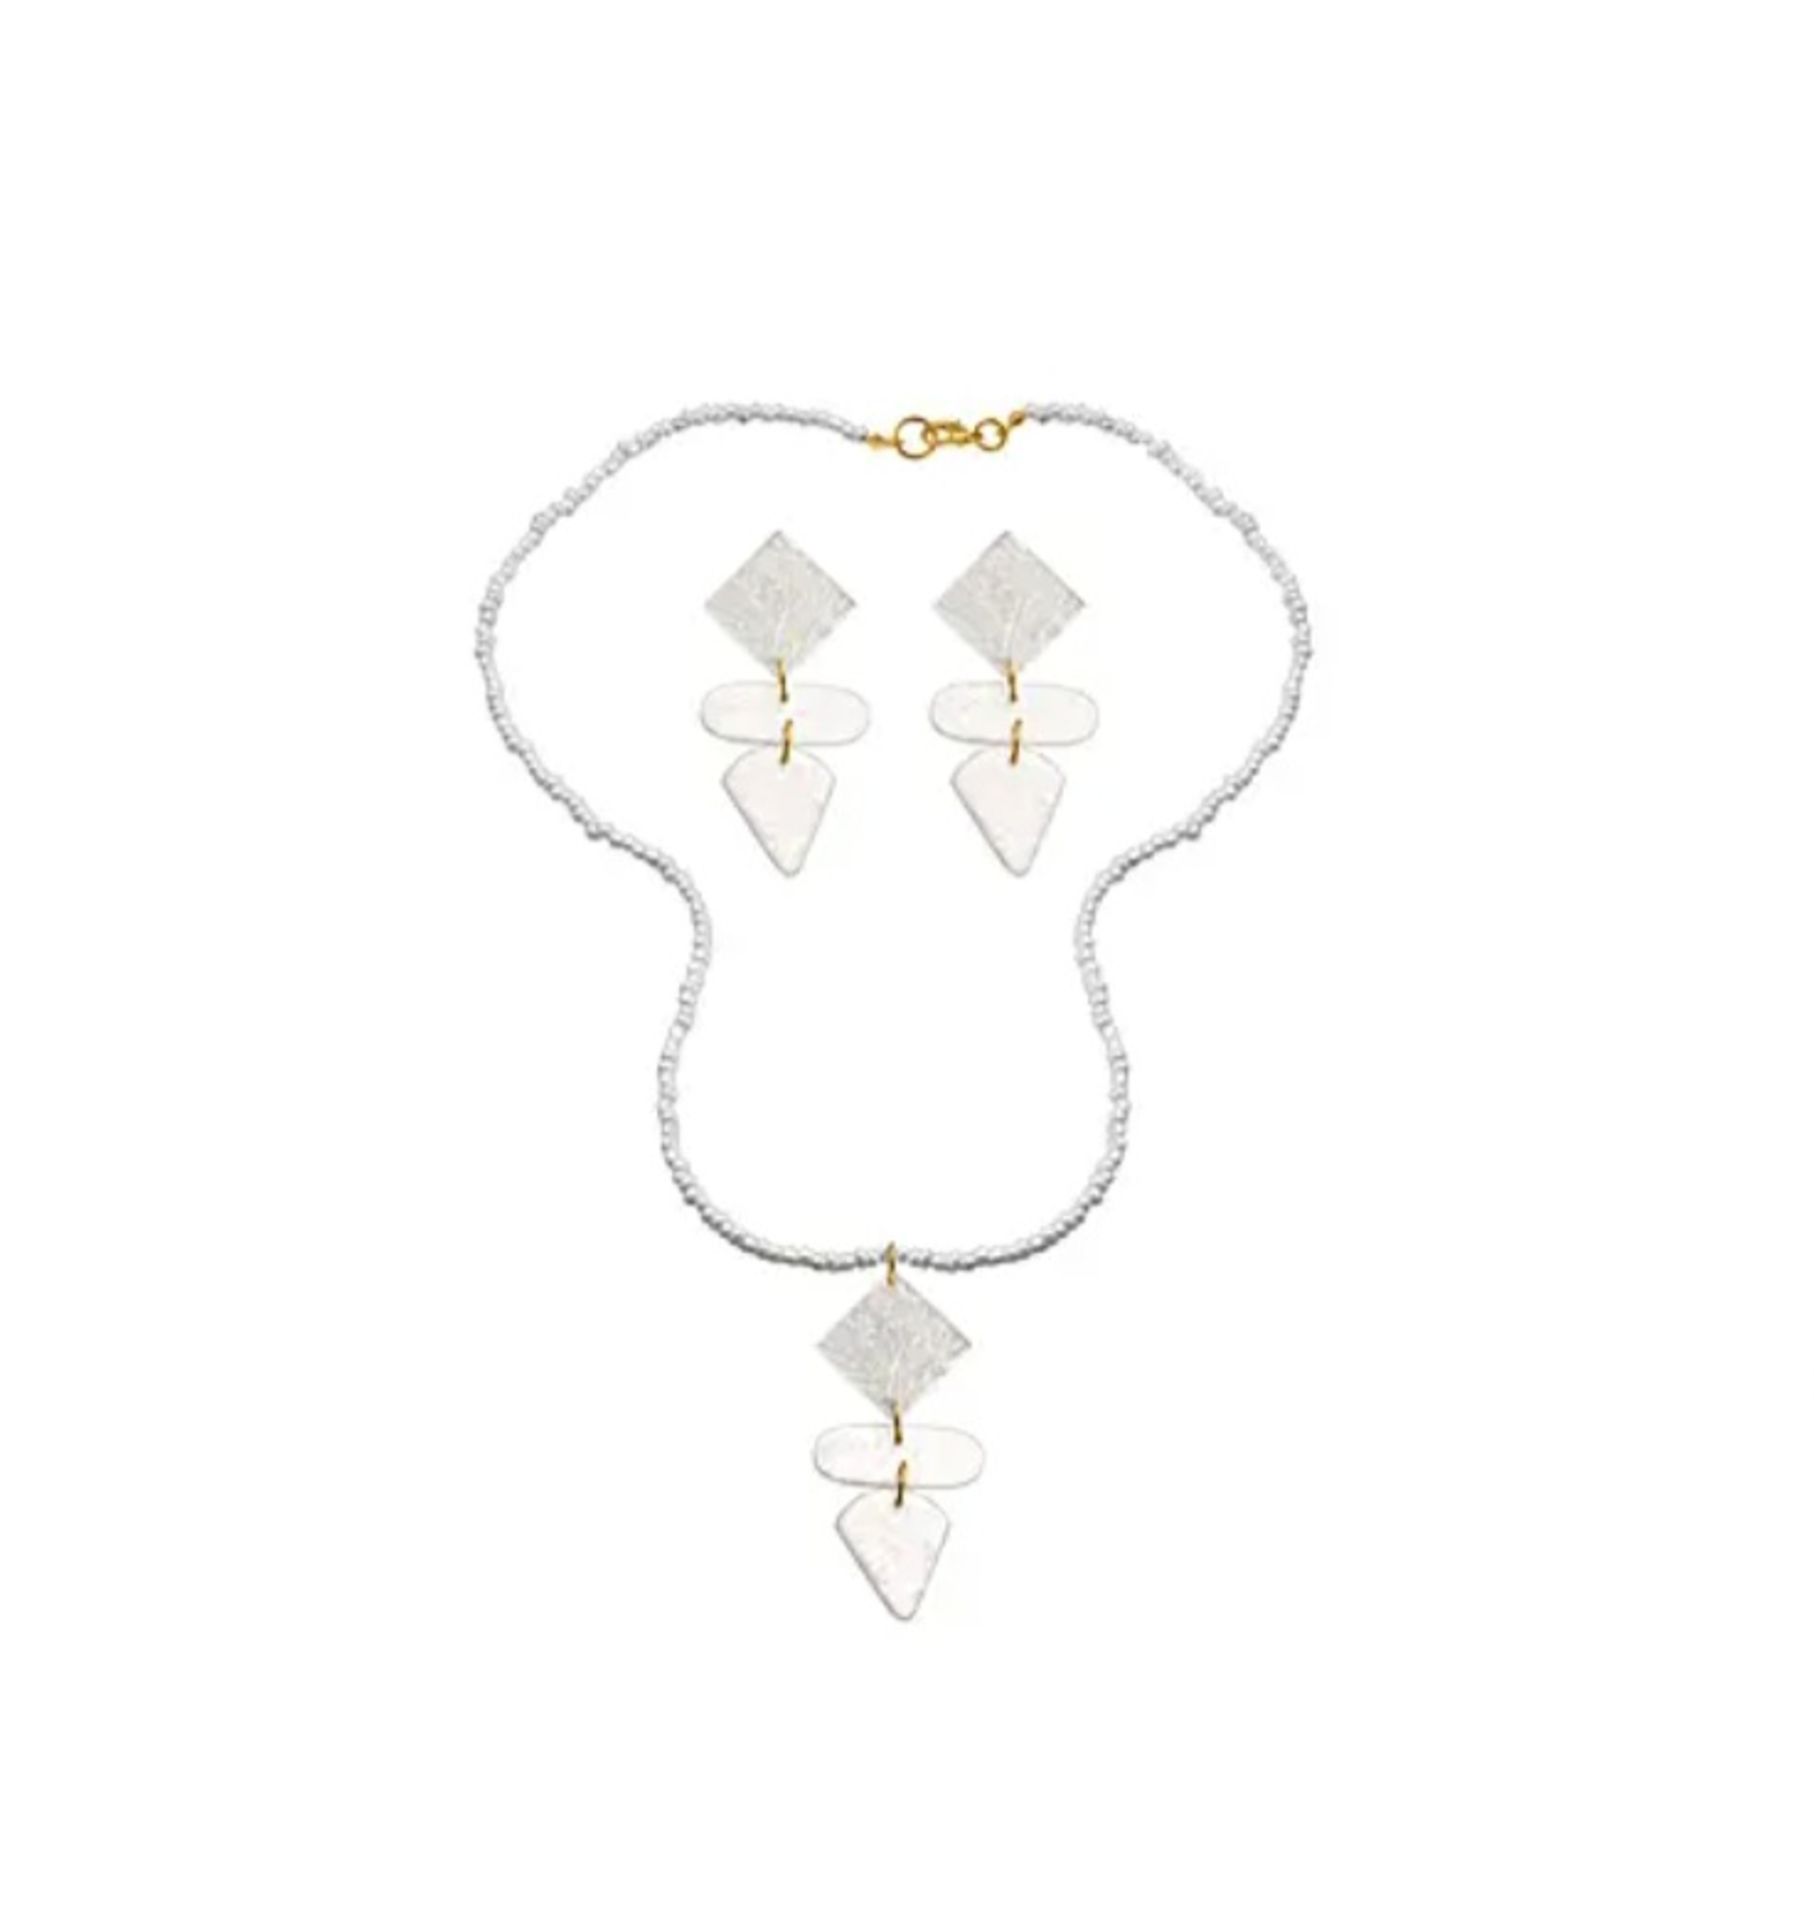 NEW! 2 Piece Set - White Shell Pearl Pendant with Necklace and Earrings - Image 2 of 5